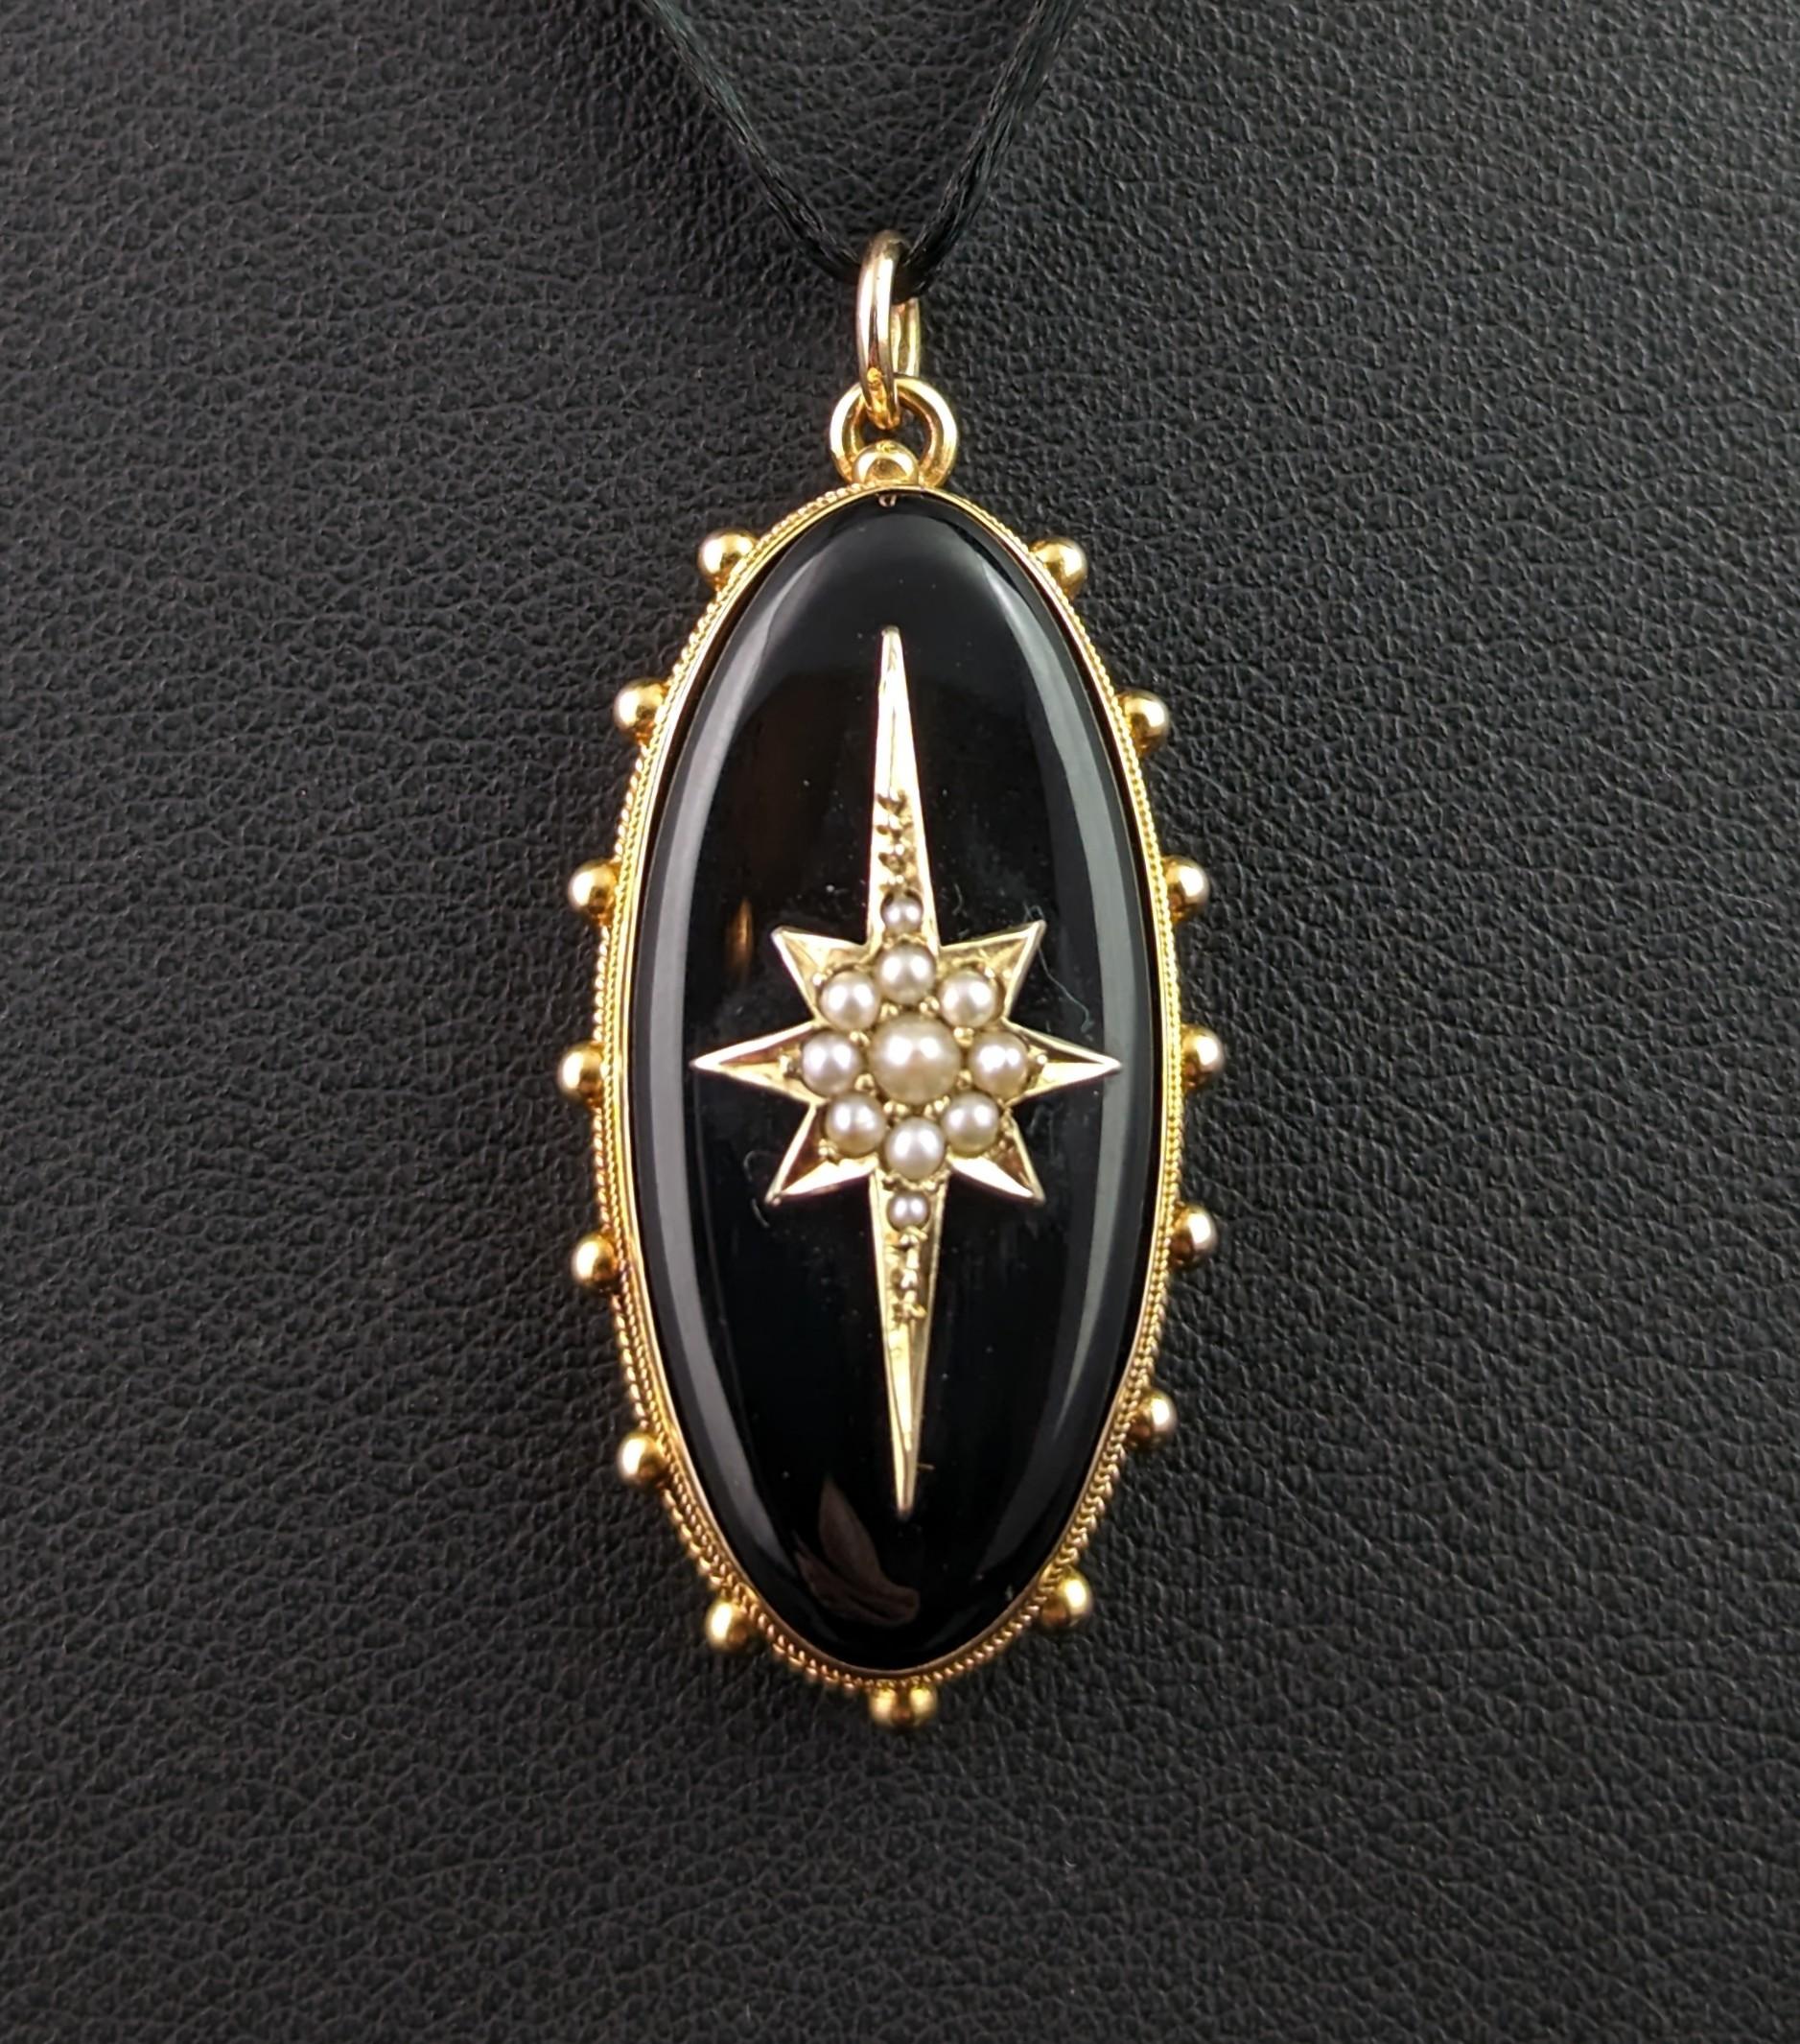 Women's Antique Onyx and Pearl Mourning Locket, Star, 9k Gold